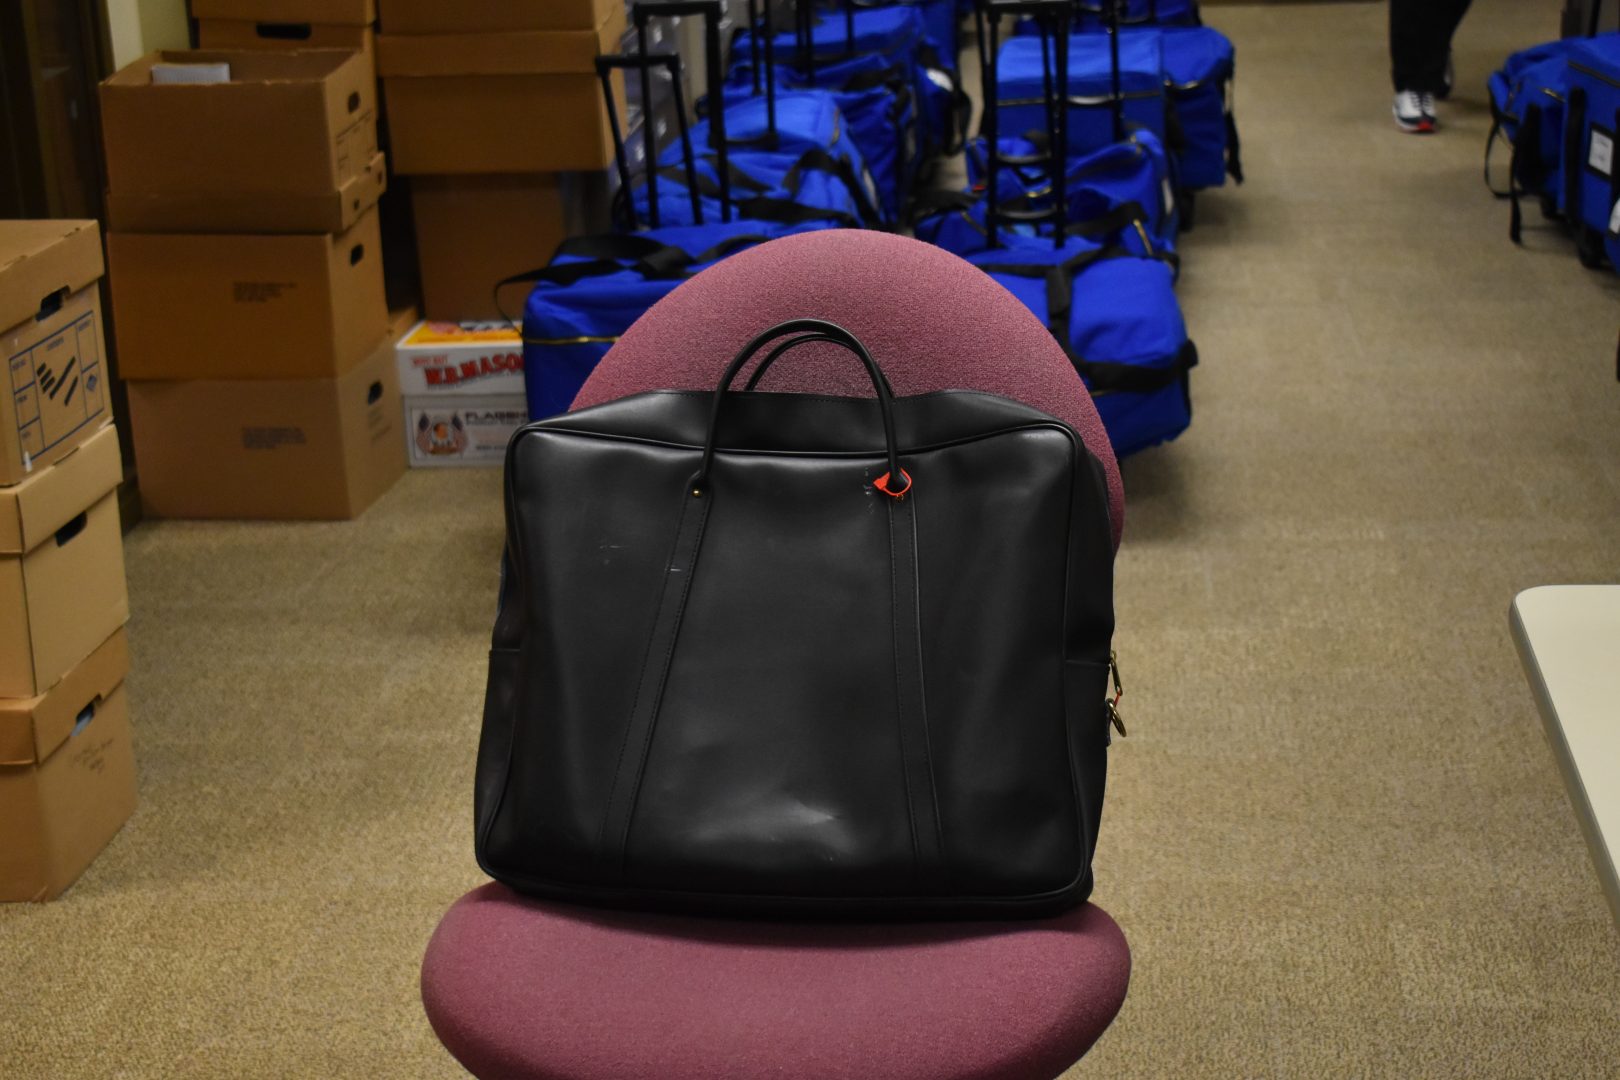 A bag used to secure ballots is seen at the York County elections office on  Nov. 6, 2019.